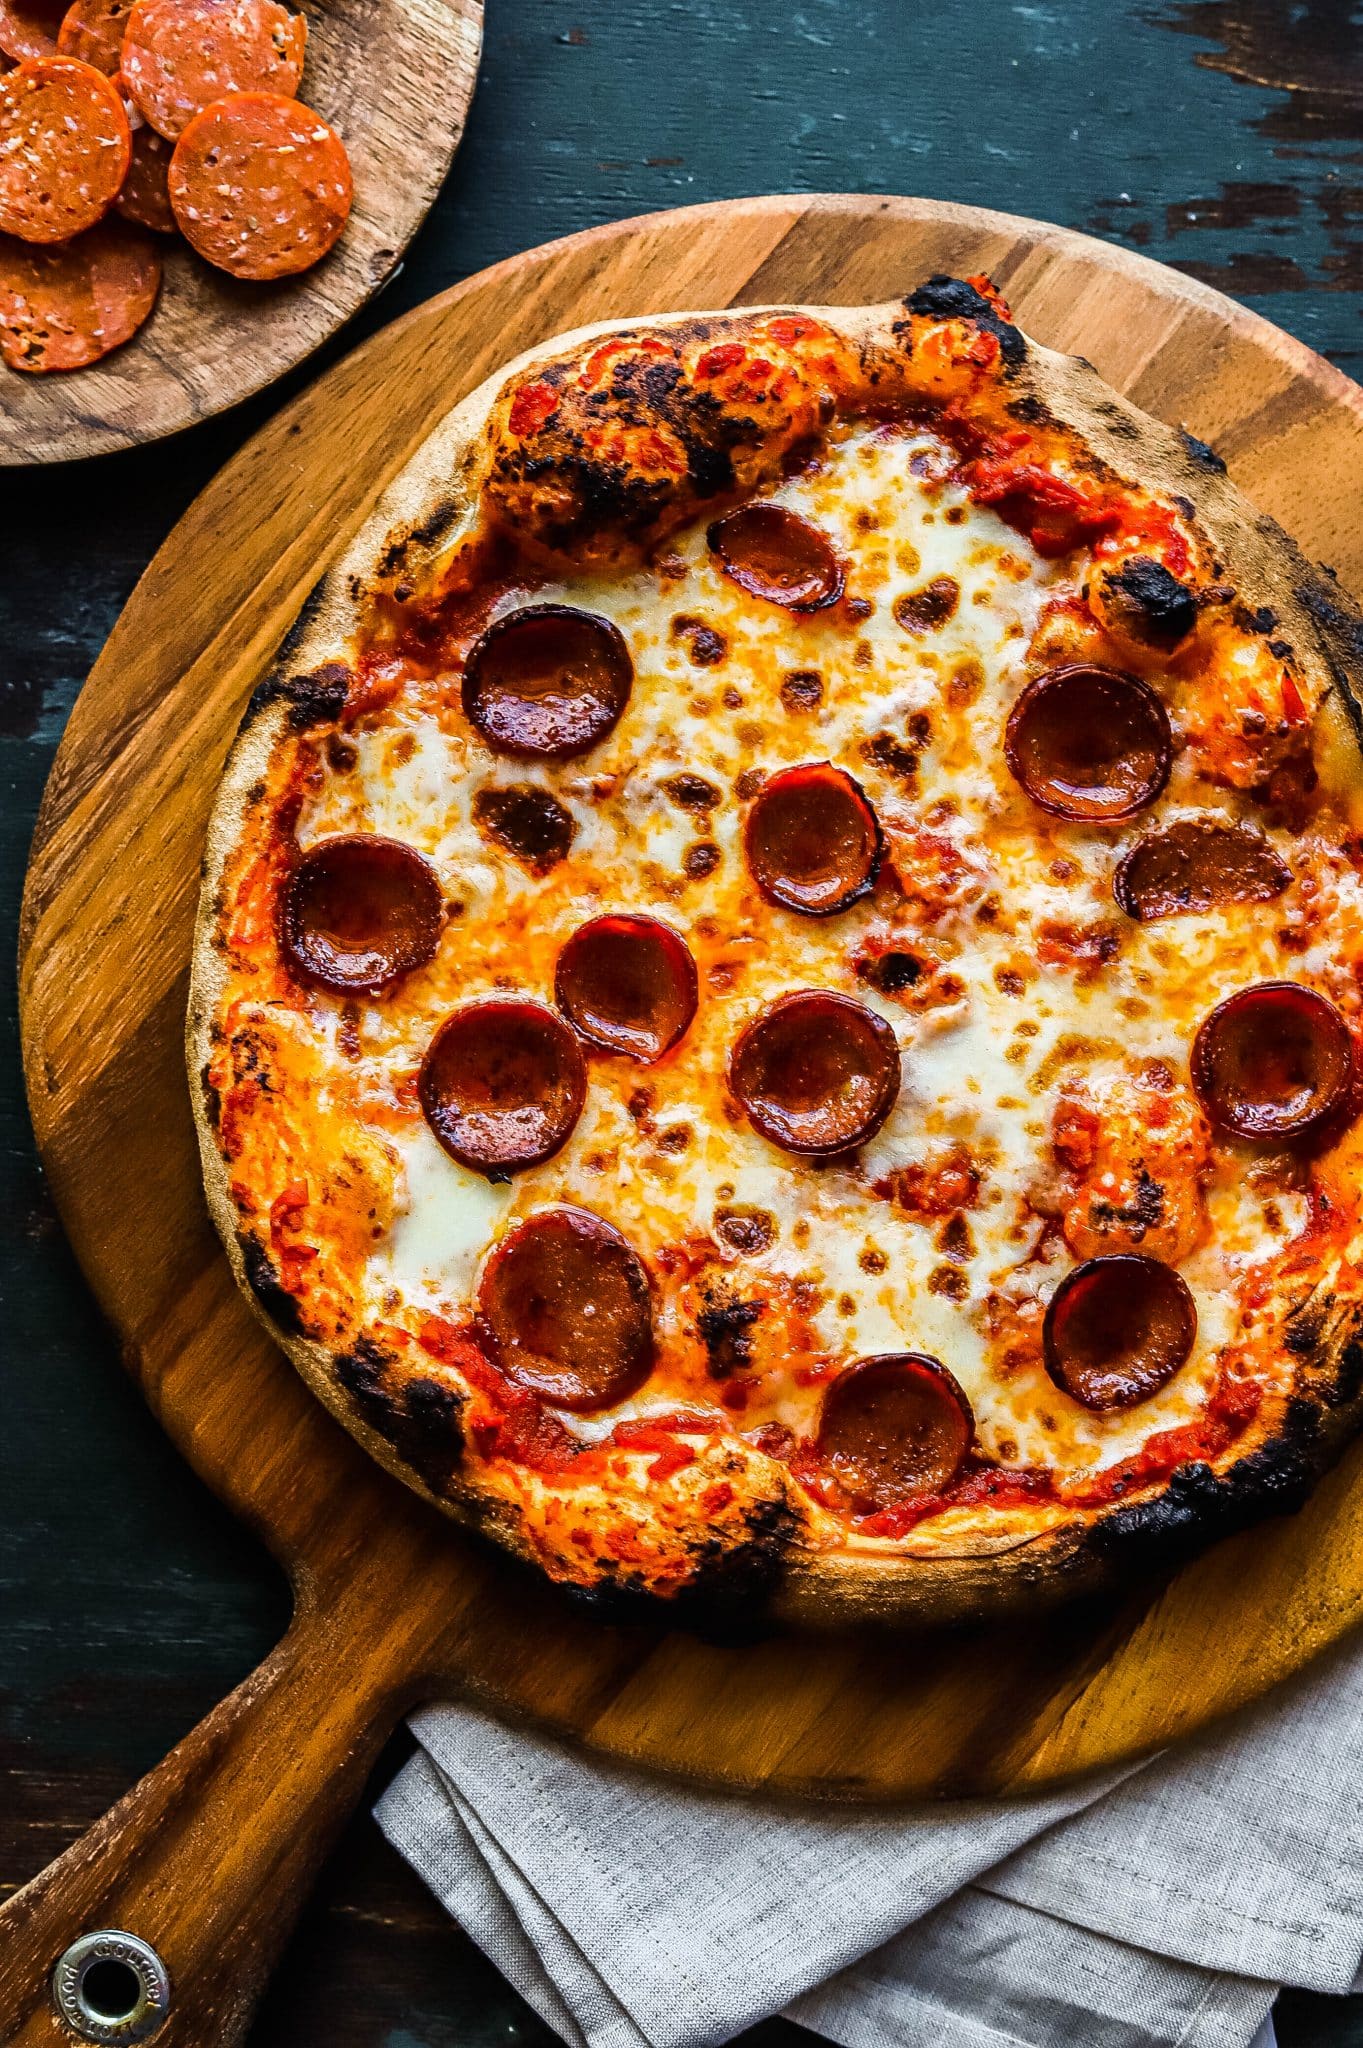 https://somuchfoodblog.com/wp-content/uploads/2022/02/same-day-pizza-dough10-scaled.jpg